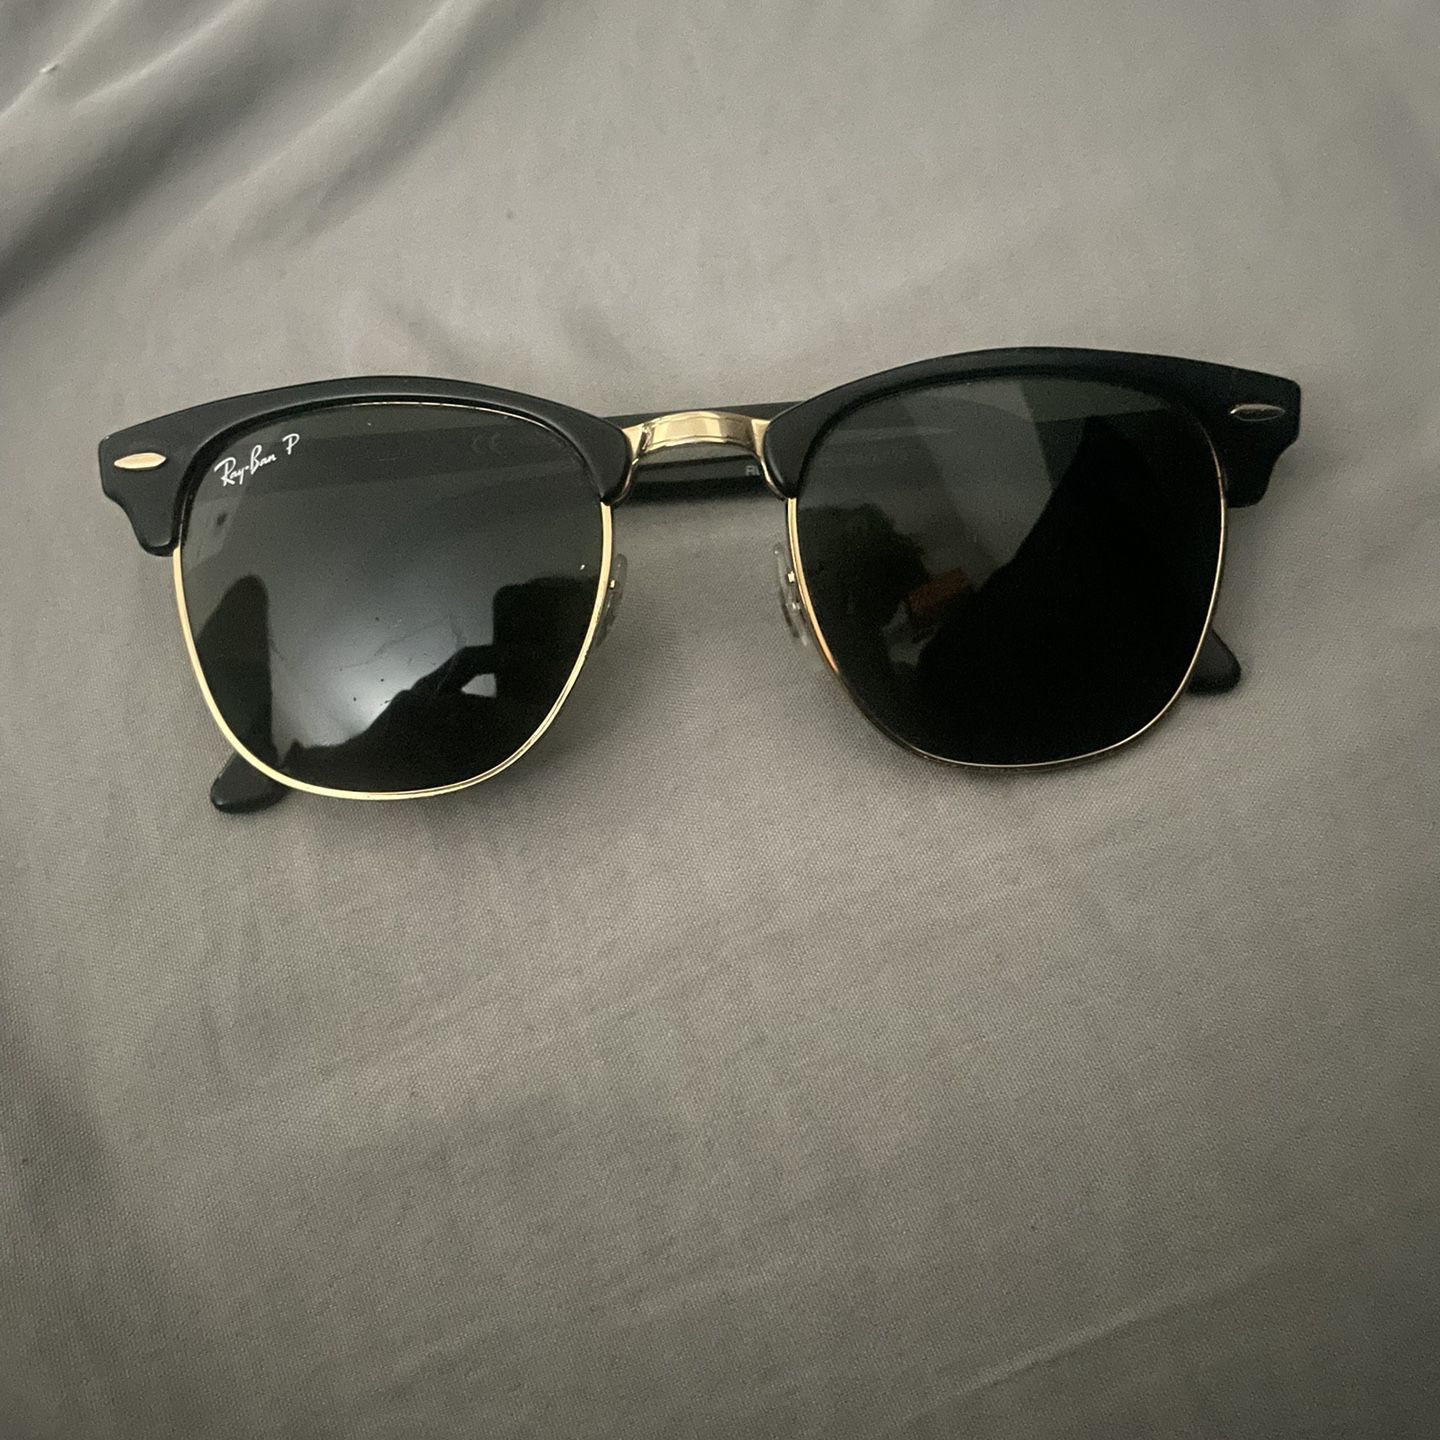 Black Sunglasses With Gold Trim for Sale in Phoenix, AZ - OfferUp